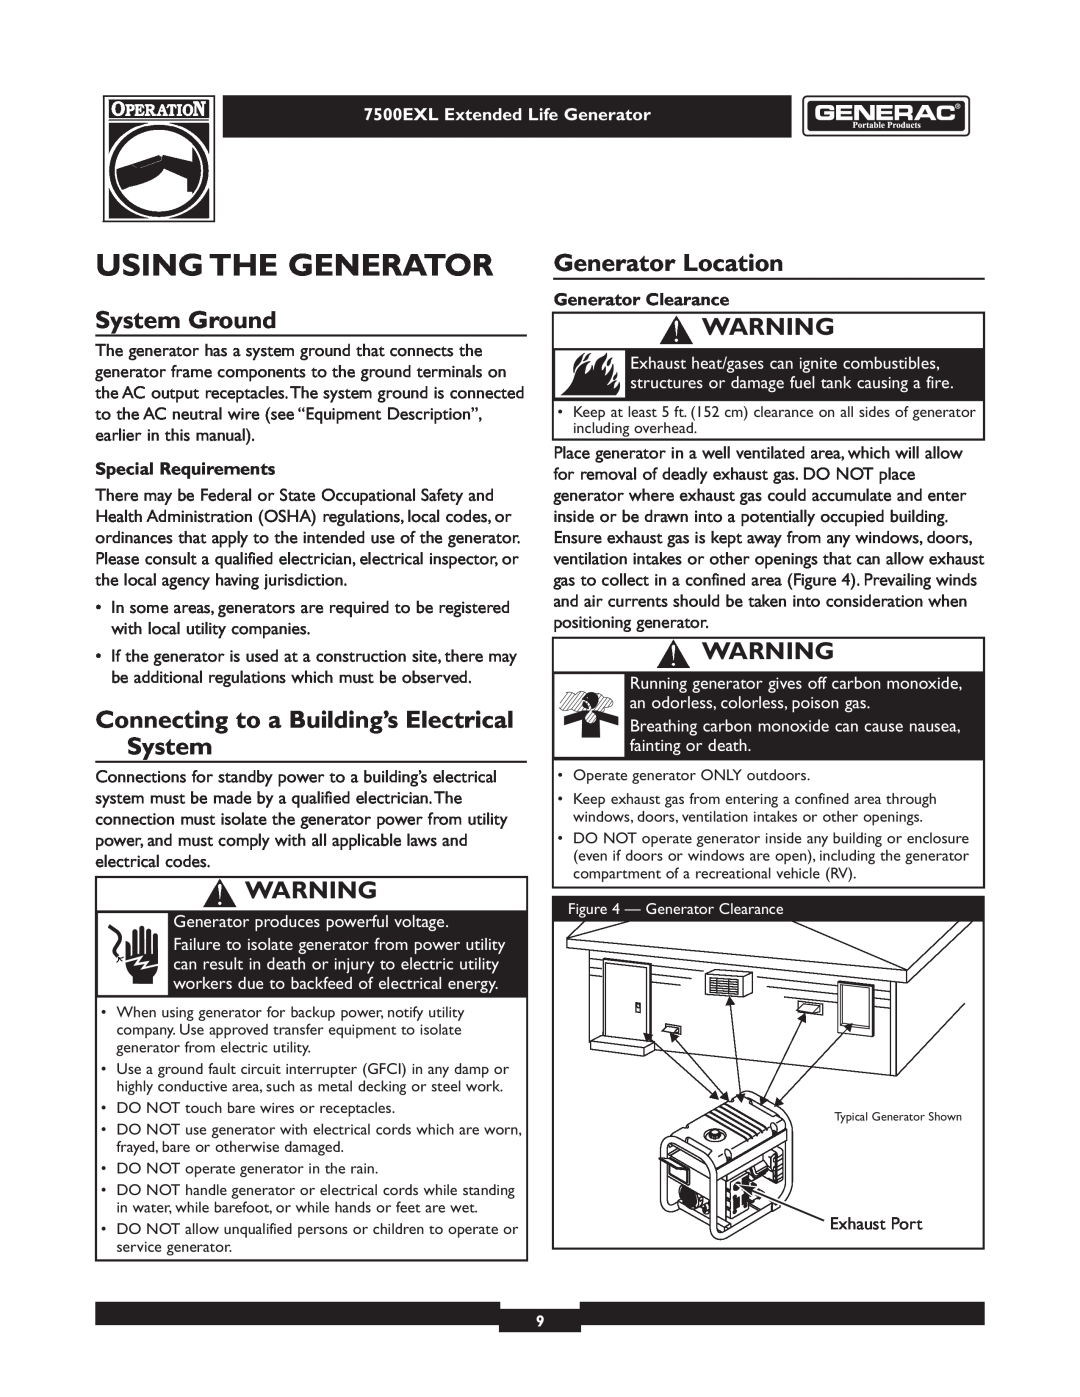 Generac 101 9-3 Using The Generator, System Ground, Generator Location, Connecting to a Building’s Electrical System 